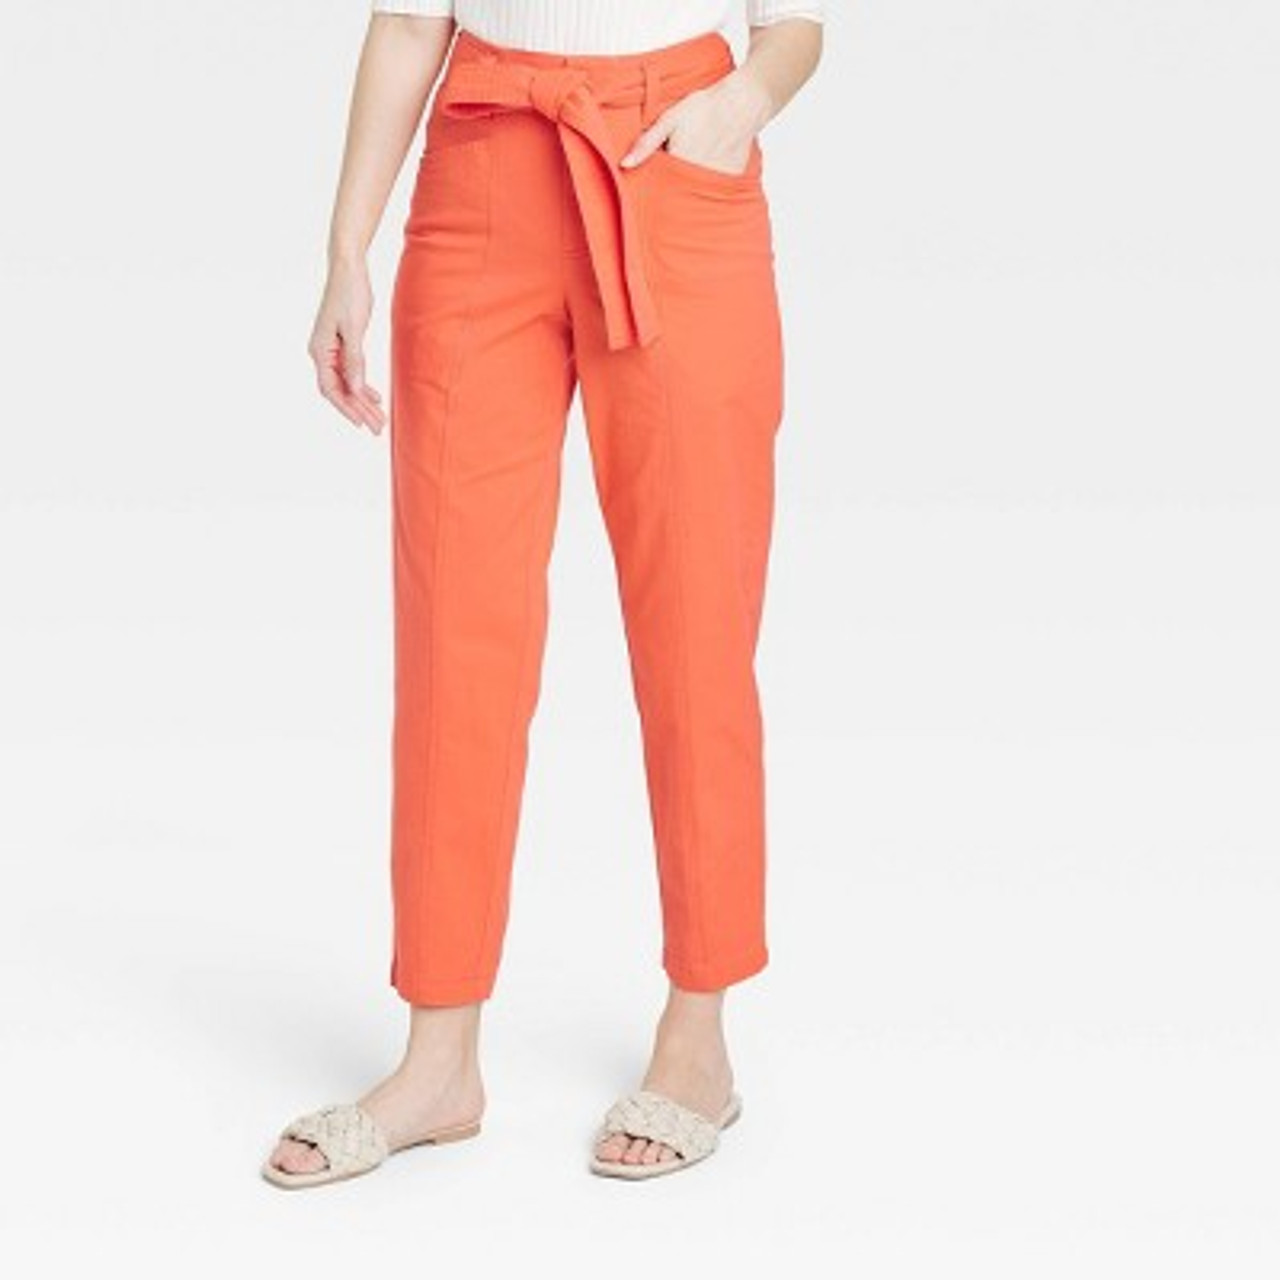 Women's High-Rise Tapered Ankle Tie-Front Pants - A New Day Orange 12